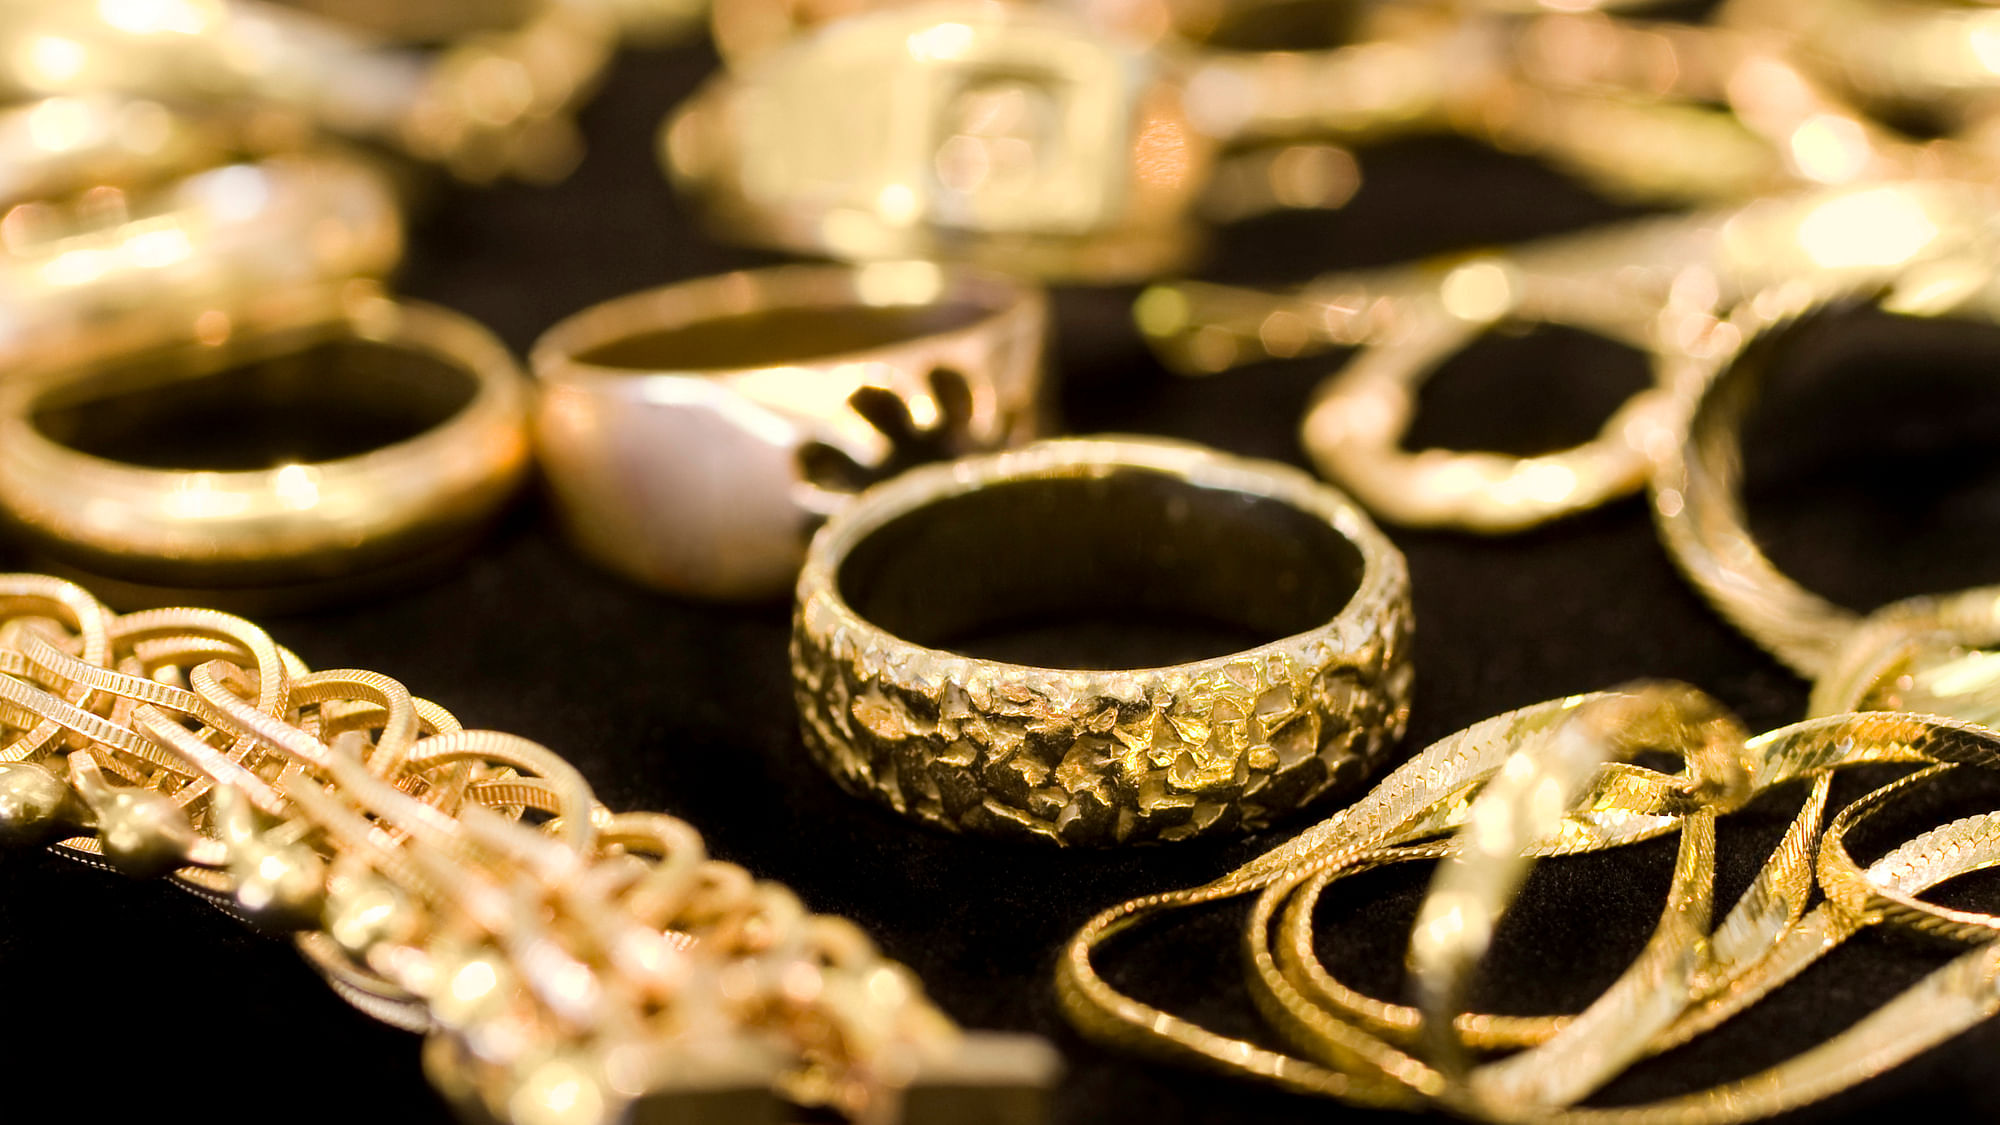 Many of India’s 4,00,000 jewellers deal in cash transactions, with small retailers often skipping documentation to avoid paying taxes. (Photo: iStockphoto)